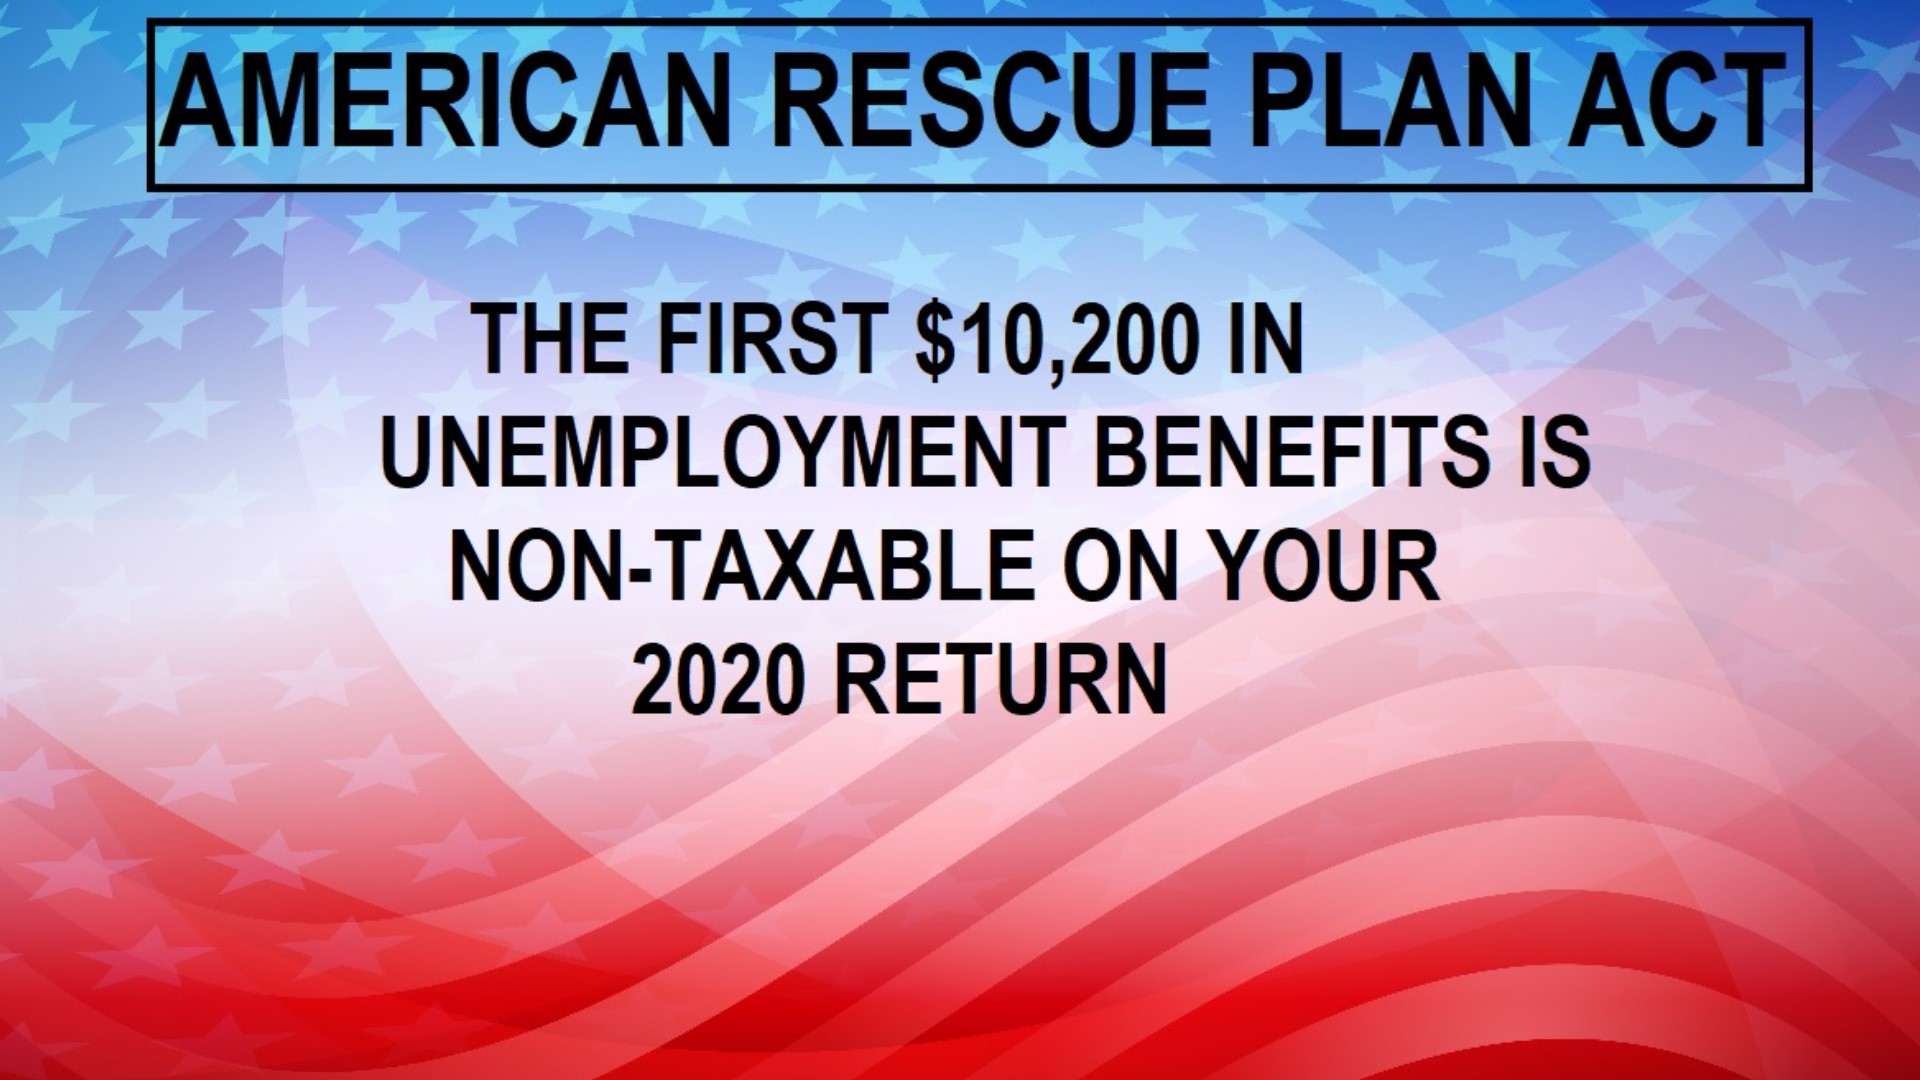 The American Rescue Plan Act made the first $10,200 in unemployment benefits non-taxable.